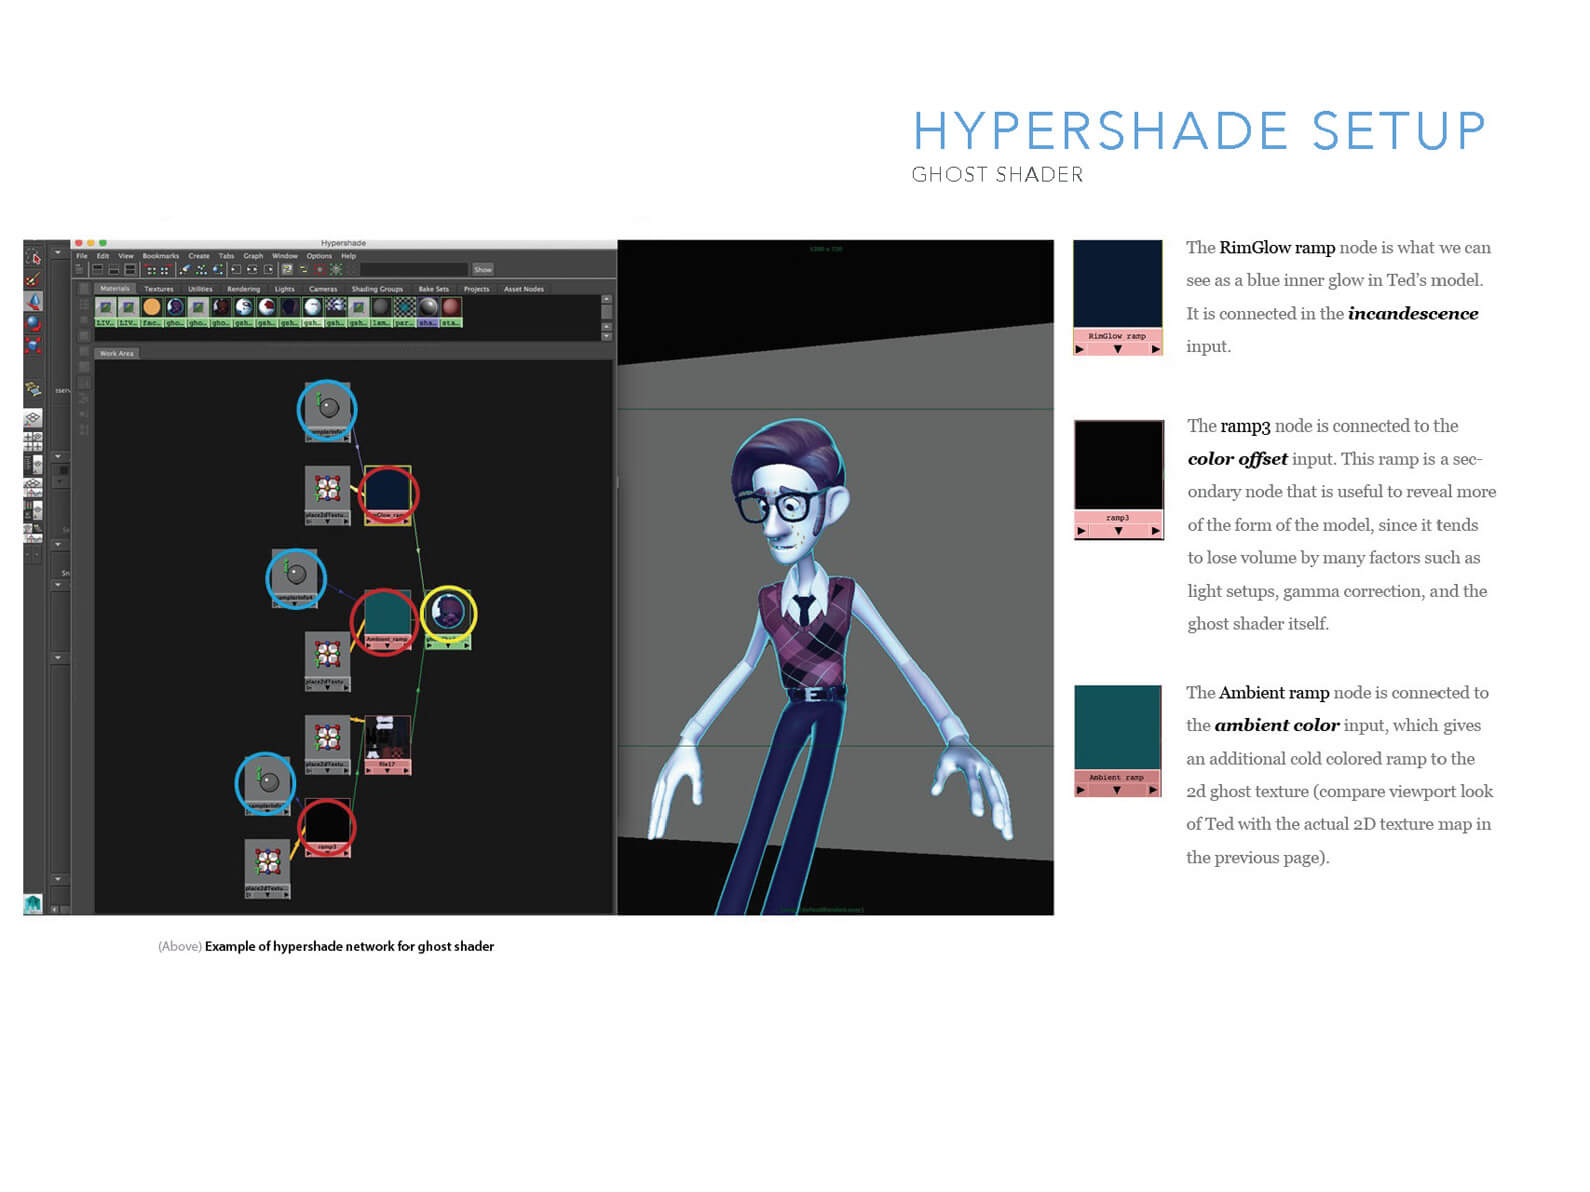 Technical description of the hypershade setup process for the character of Ted from Orientation Center for the Unseen